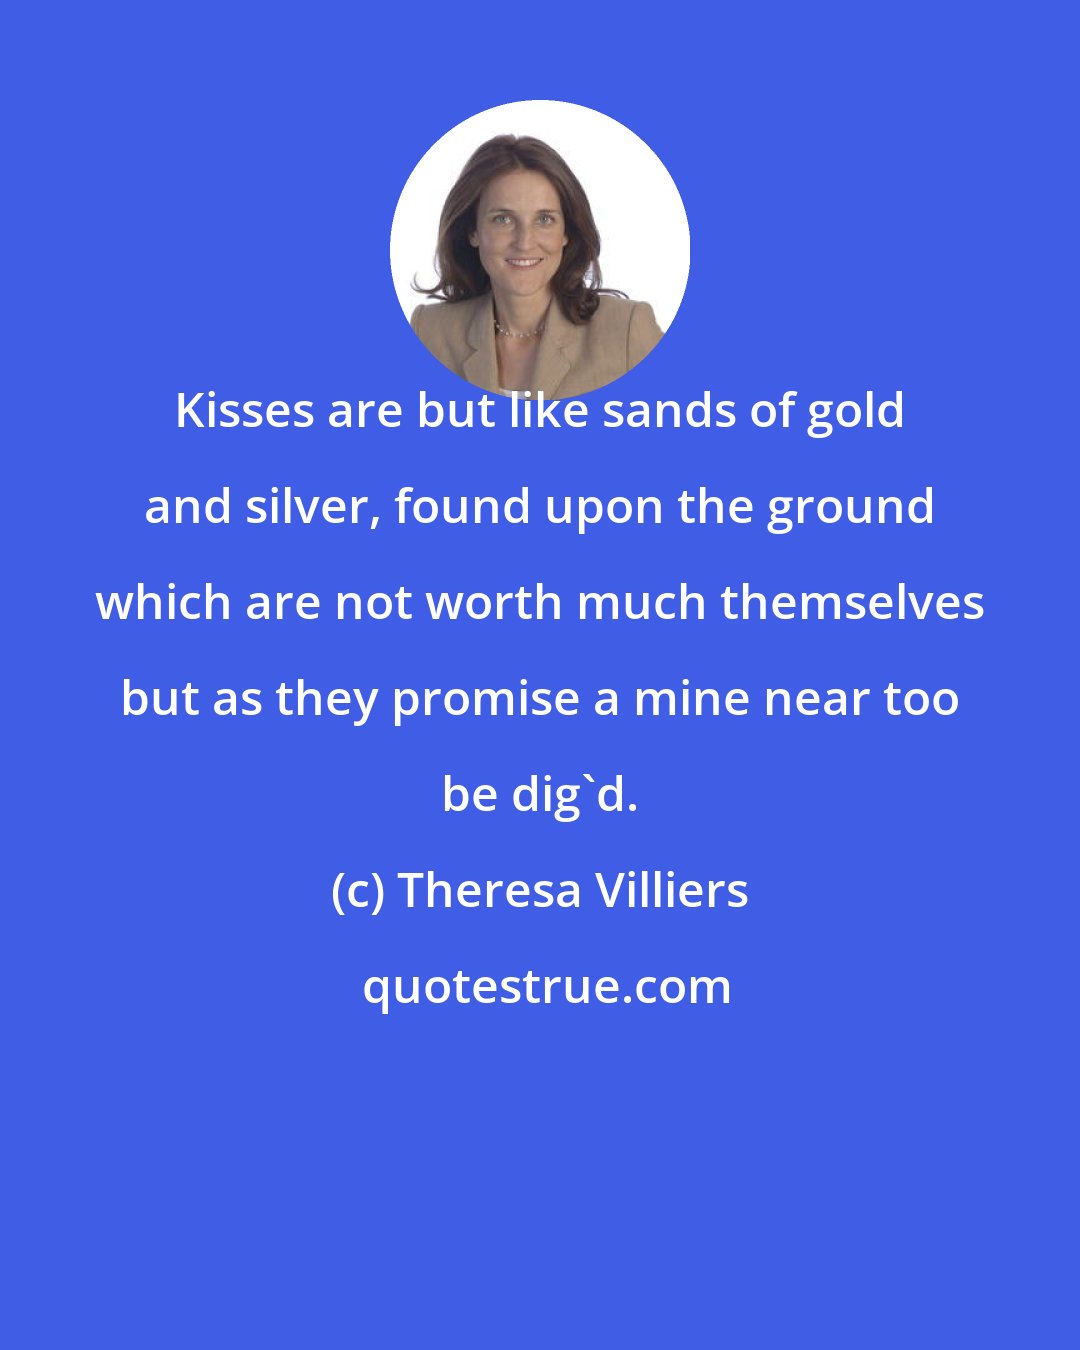 Theresa Villiers: Kisses are but like sands of gold and silver, found upon the ground which are not worth much themselves but as they promise a mine near too be dig'd.